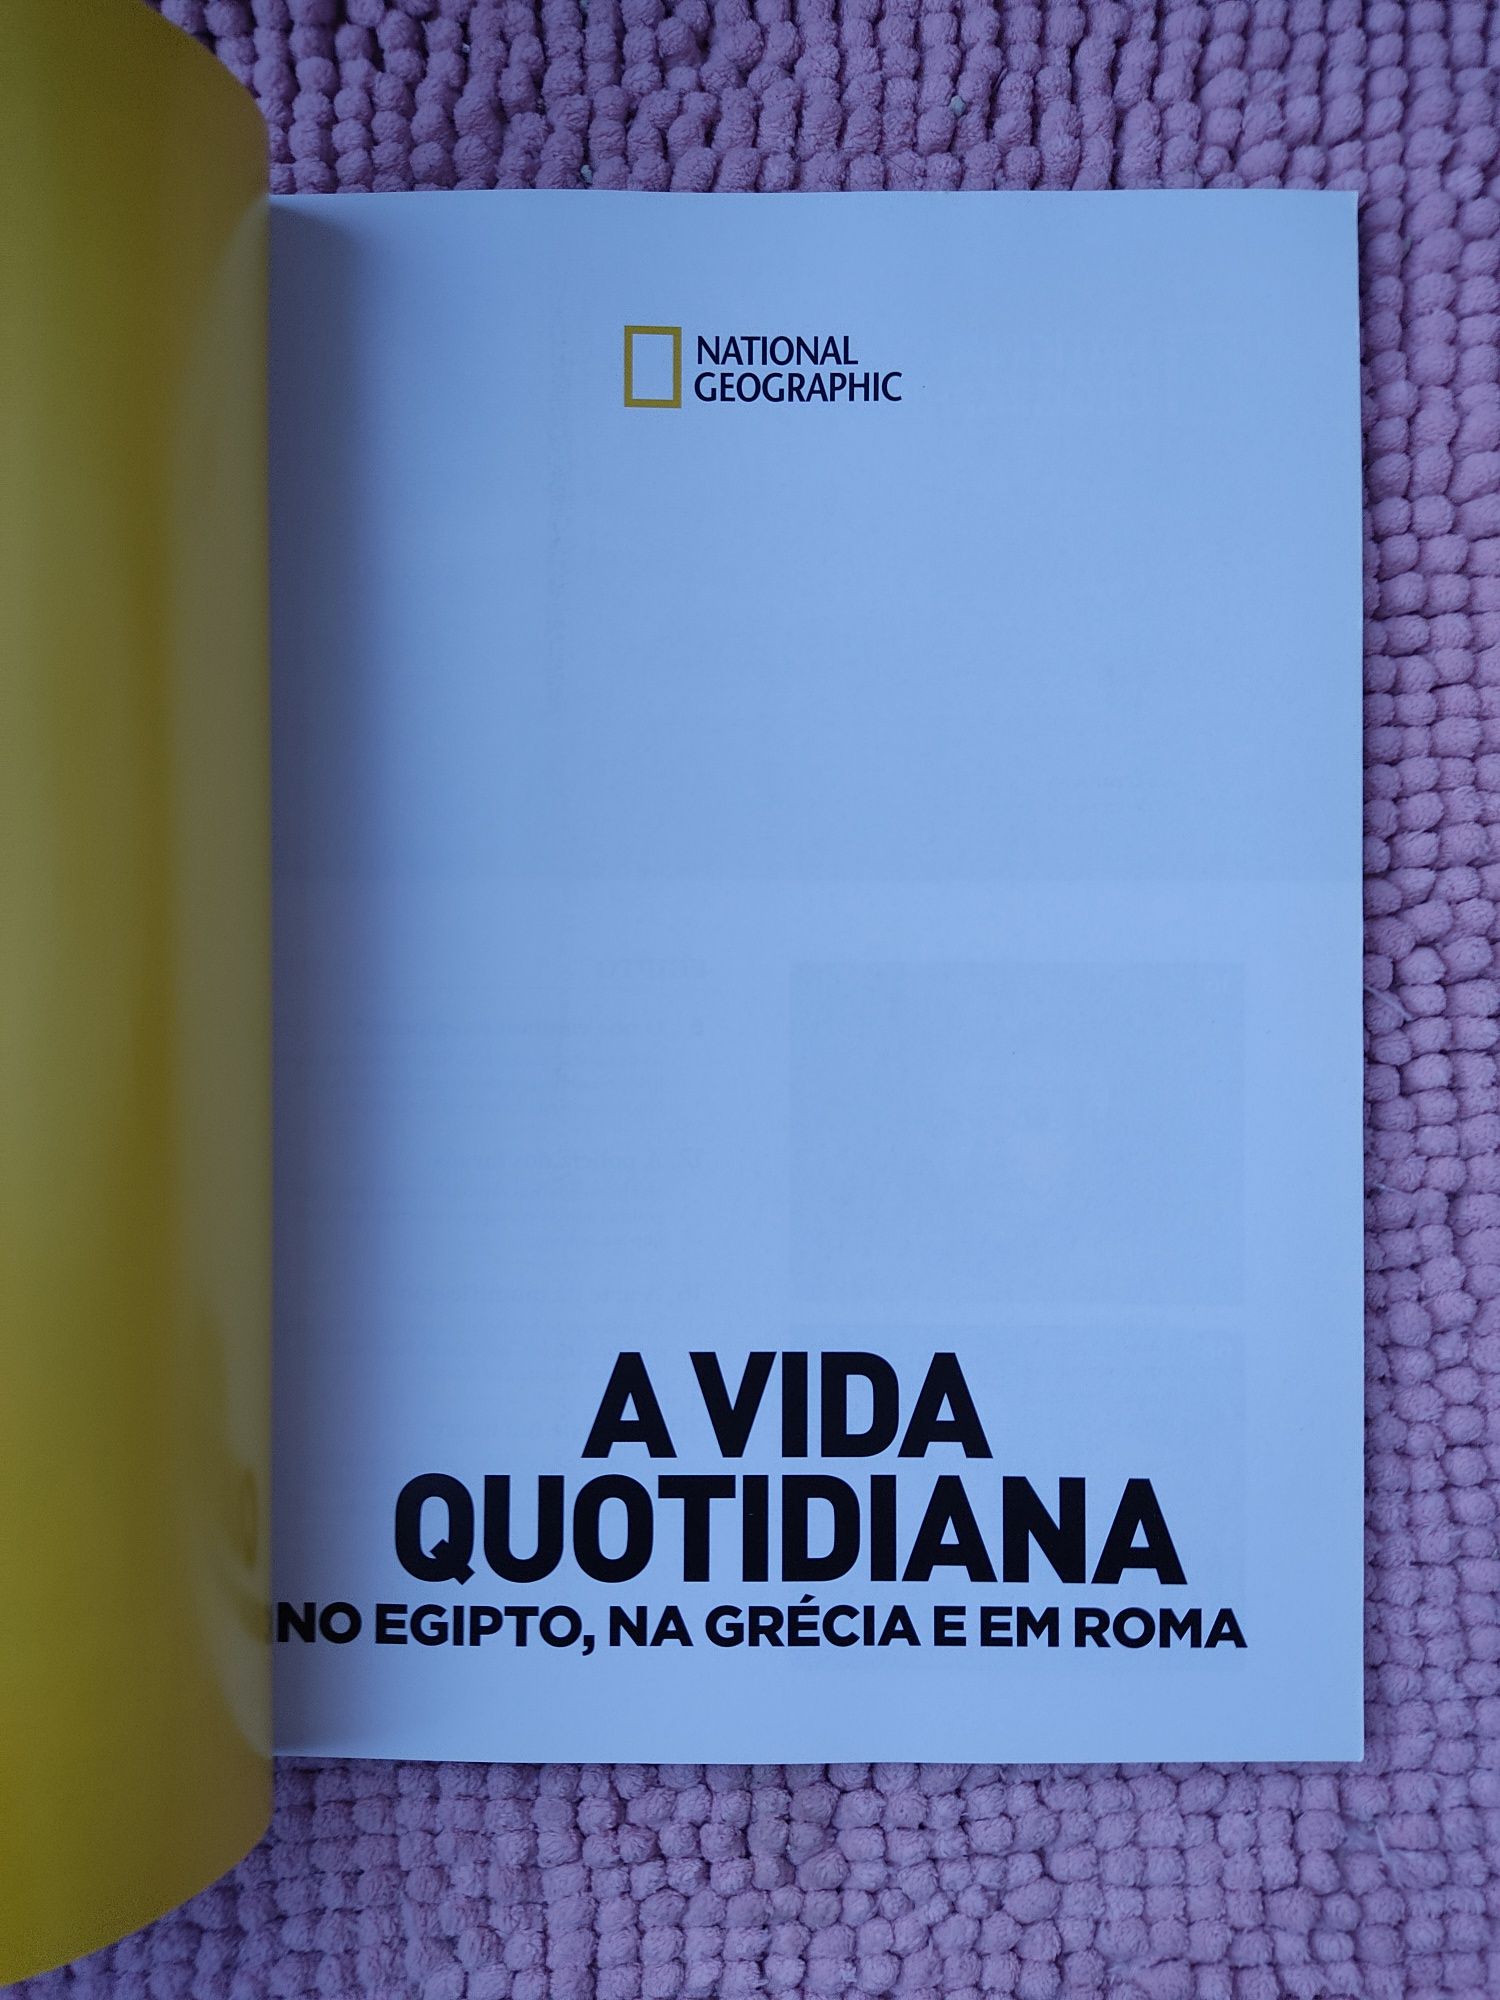 National Geographic - A Vida Quotidiana